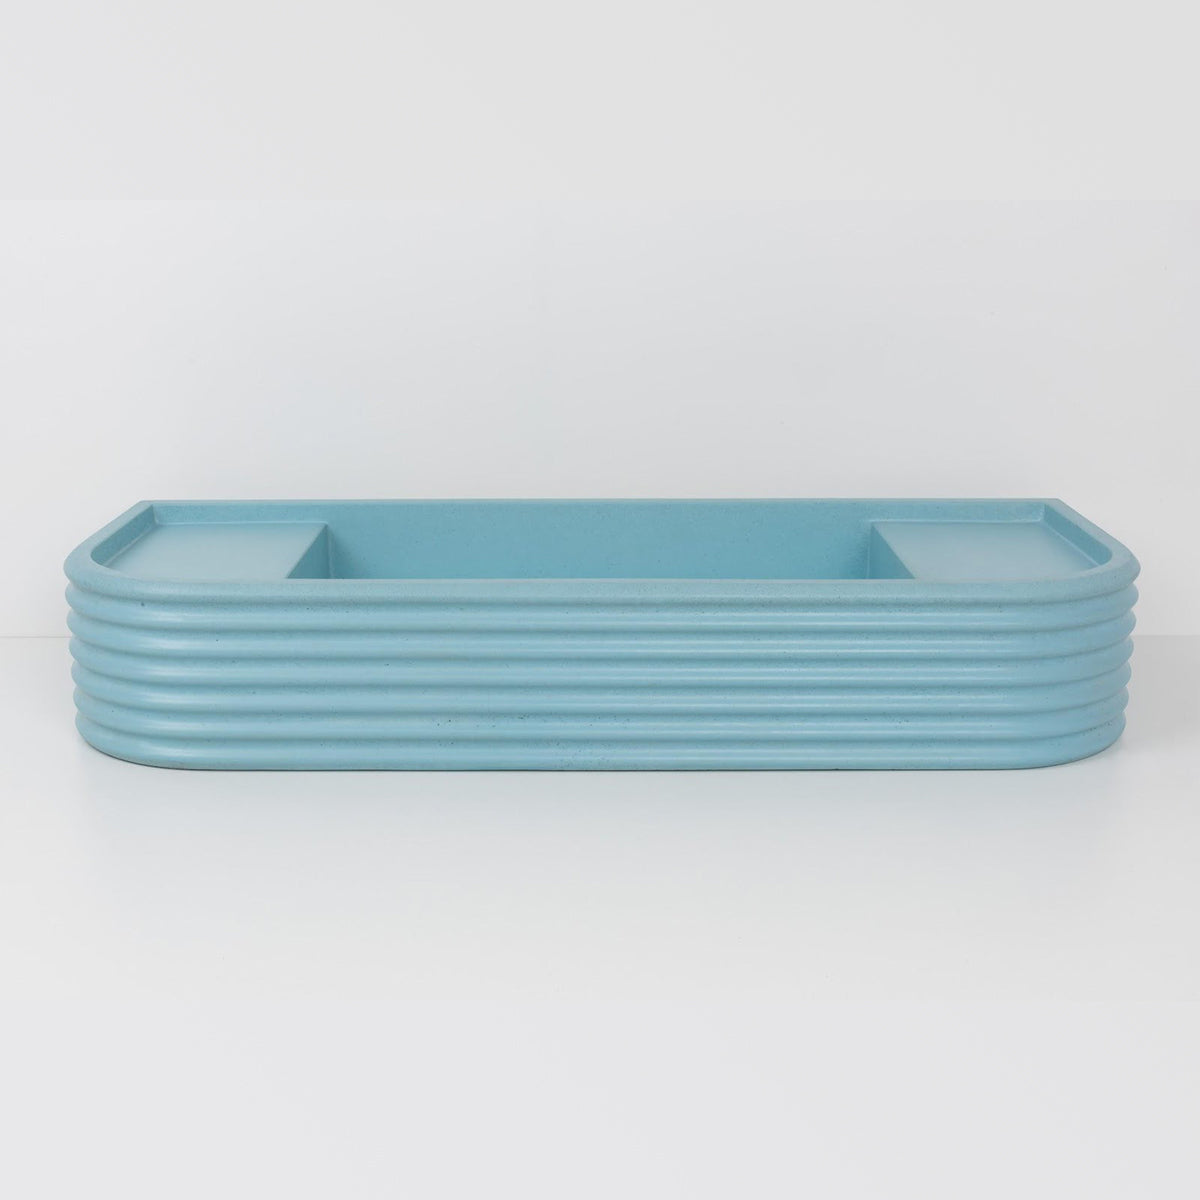 Kast Iva Curved Wall-Hung Concrete Basin With Shelf Surface